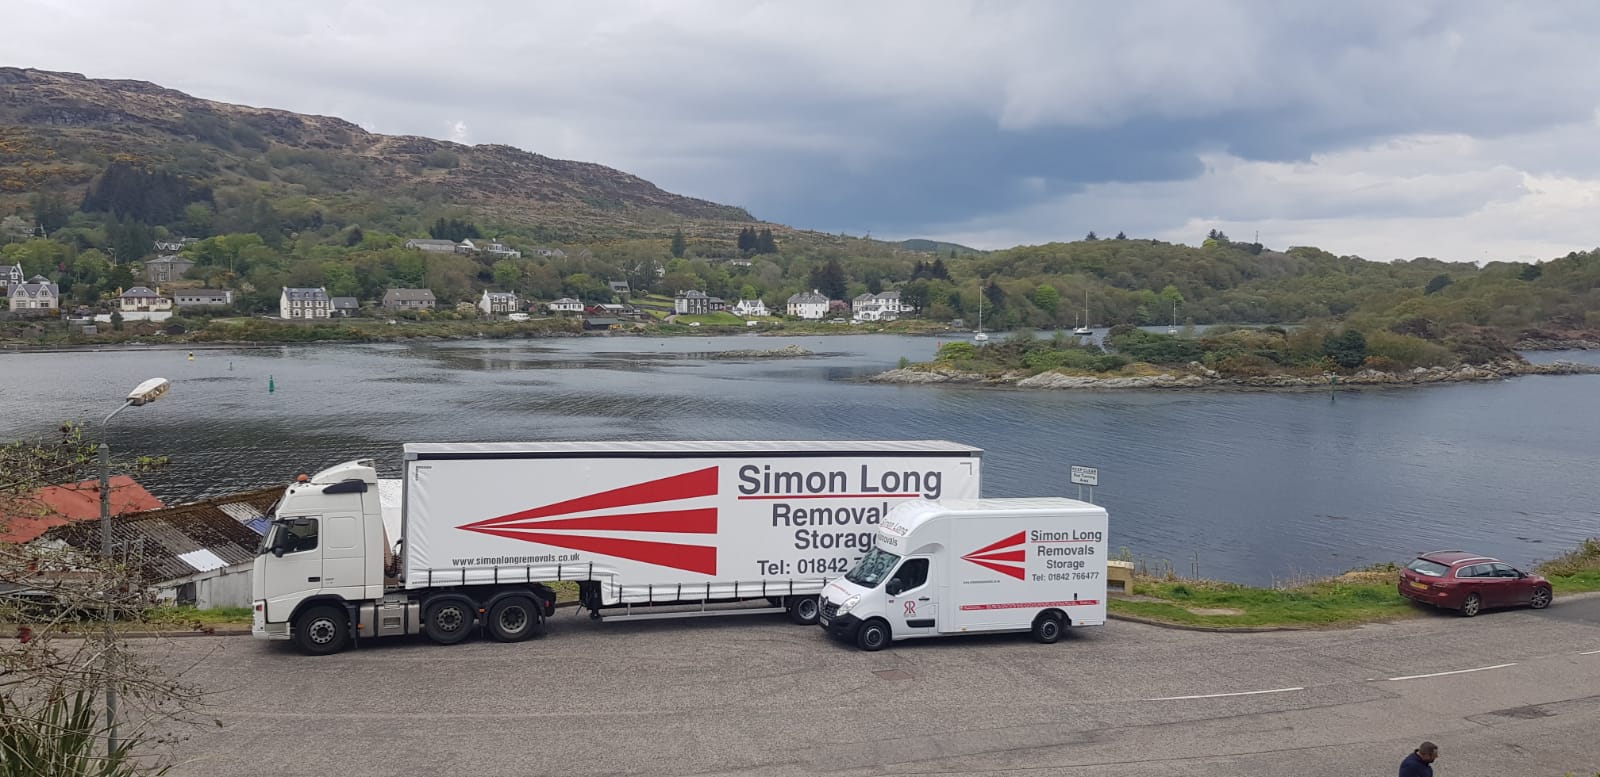 Simon Long Removals large lorry and removal van